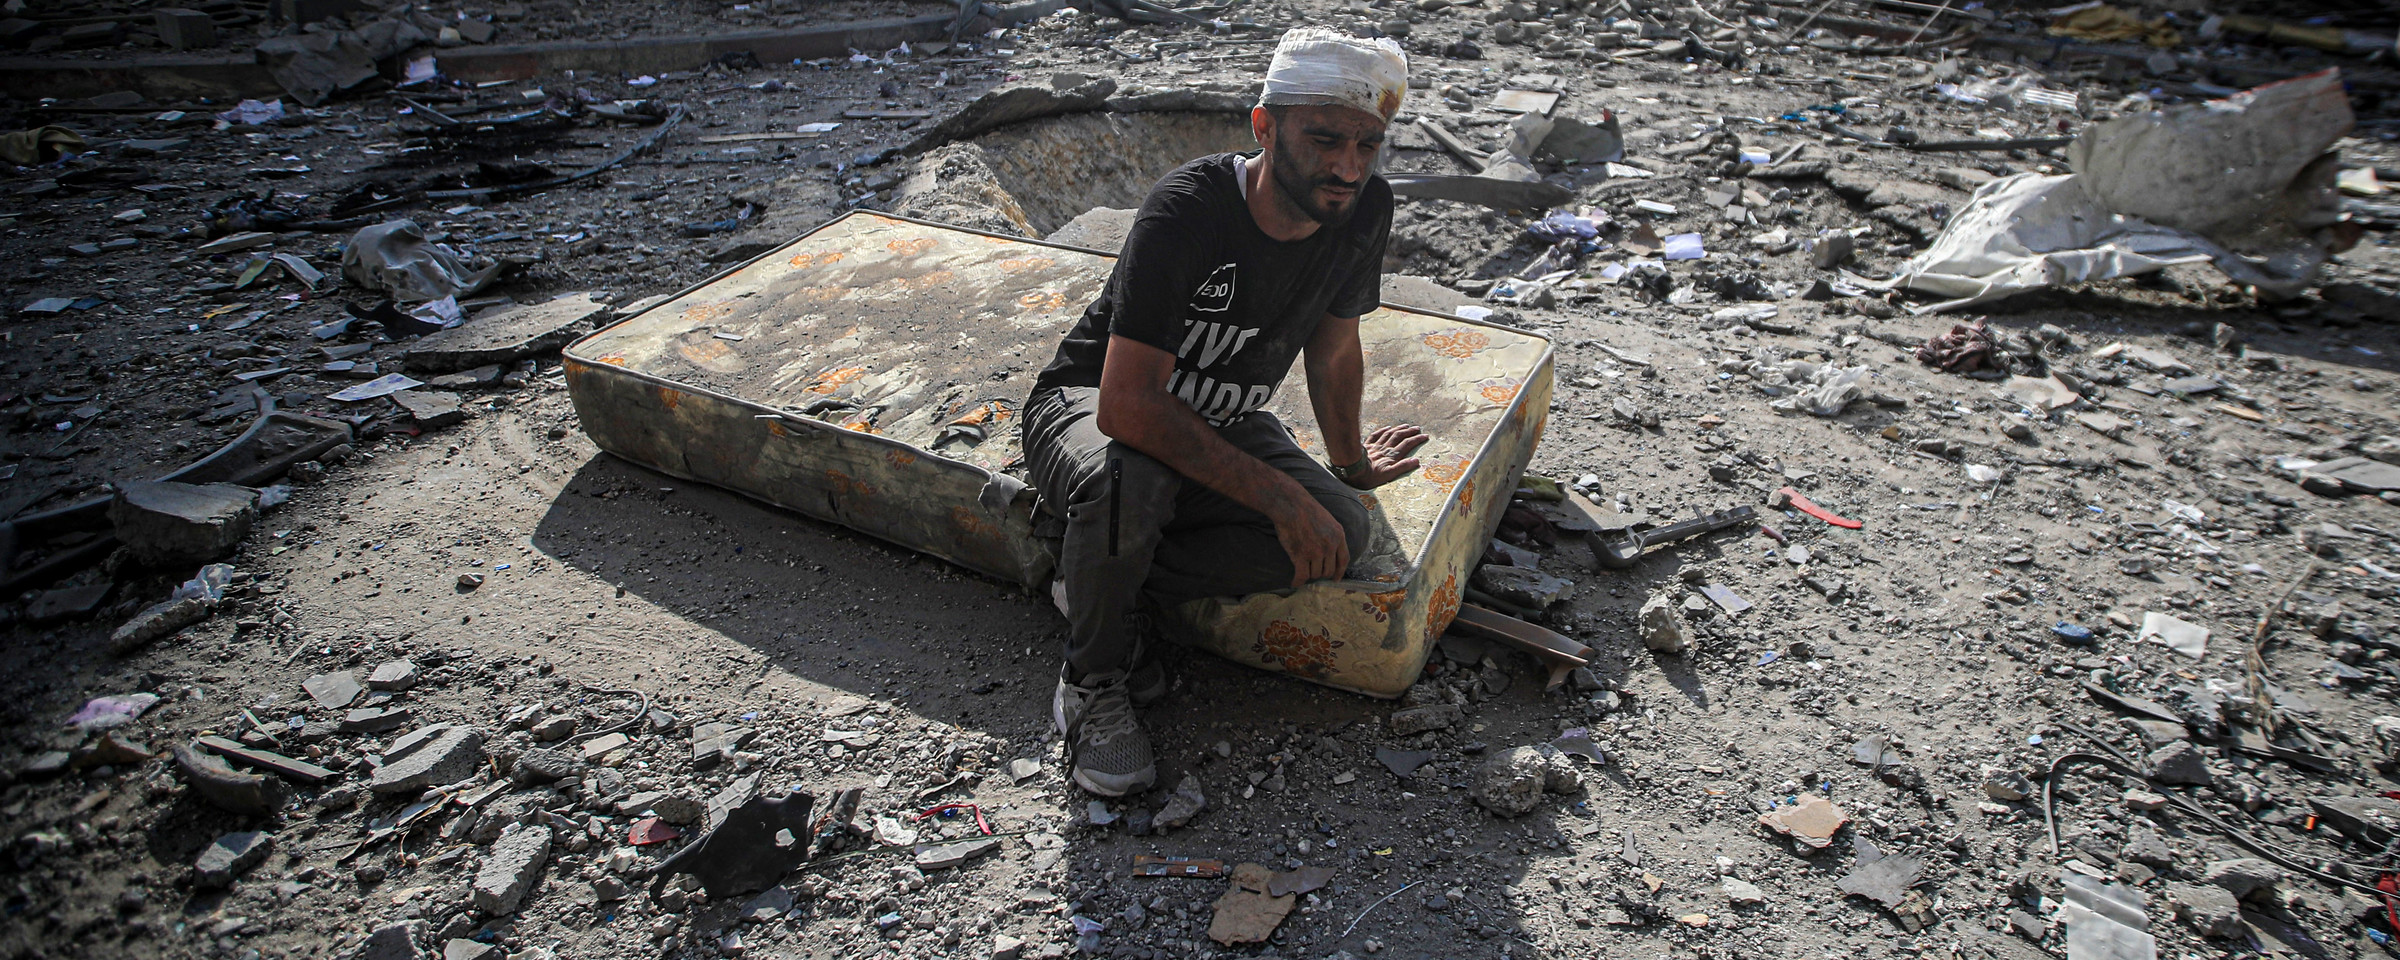 A man with a bandaged head sits on a mattress in a debris-filled street